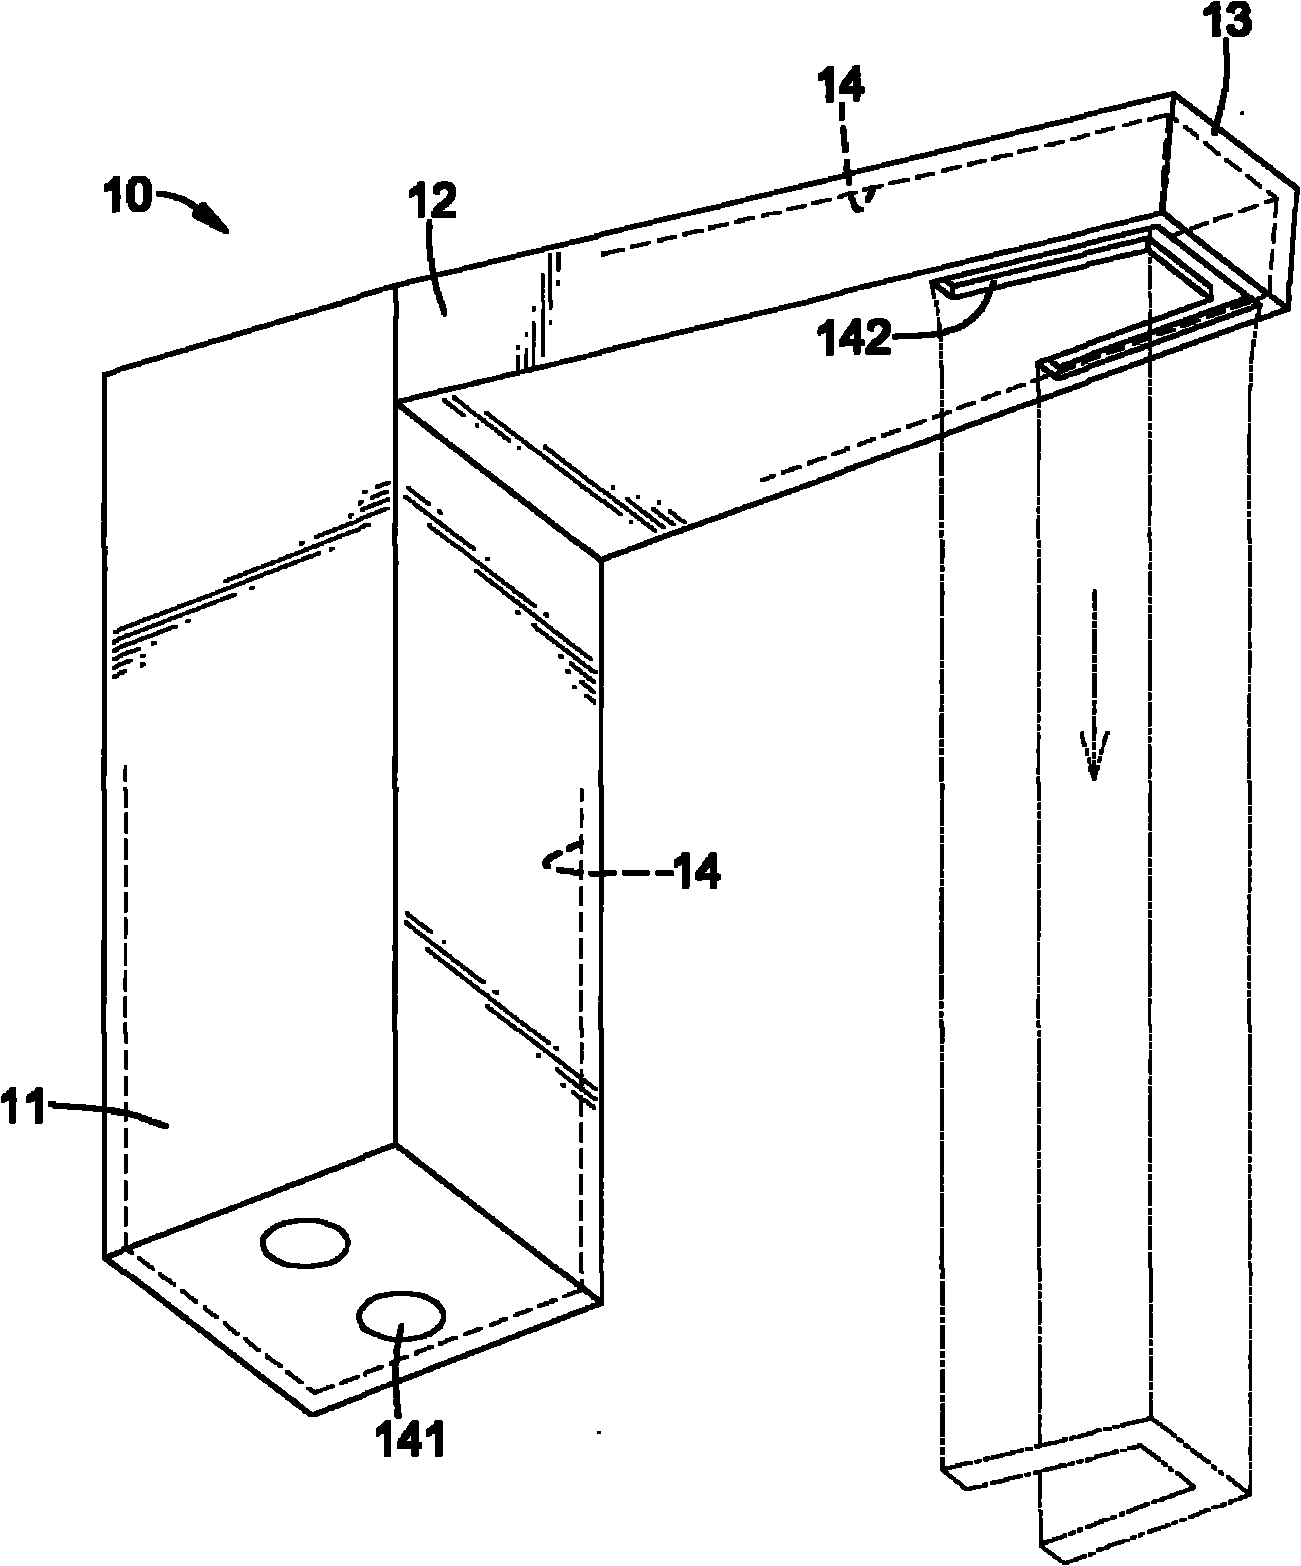 Water tap with U-shaped water outlet